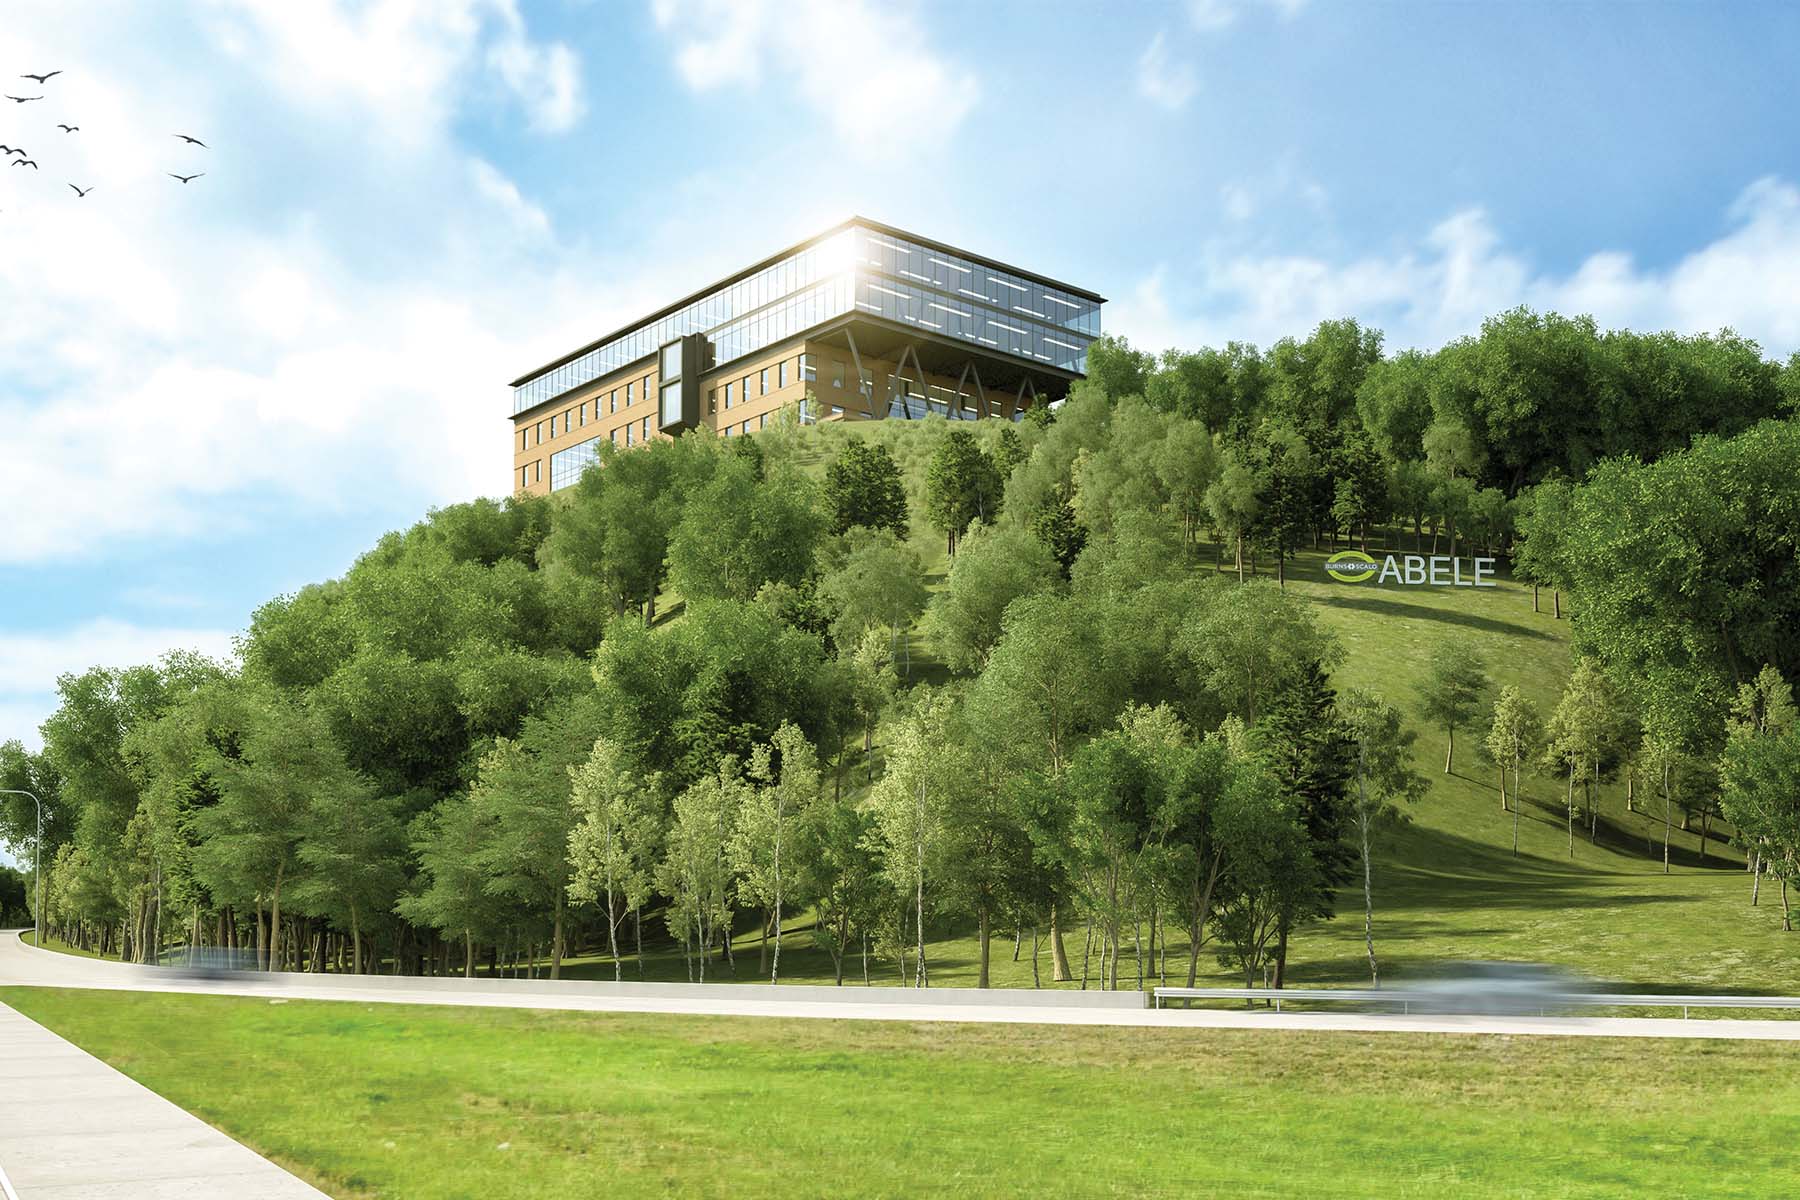 Office building perched at the top of a hill overlooking an interstate exit and field of trees